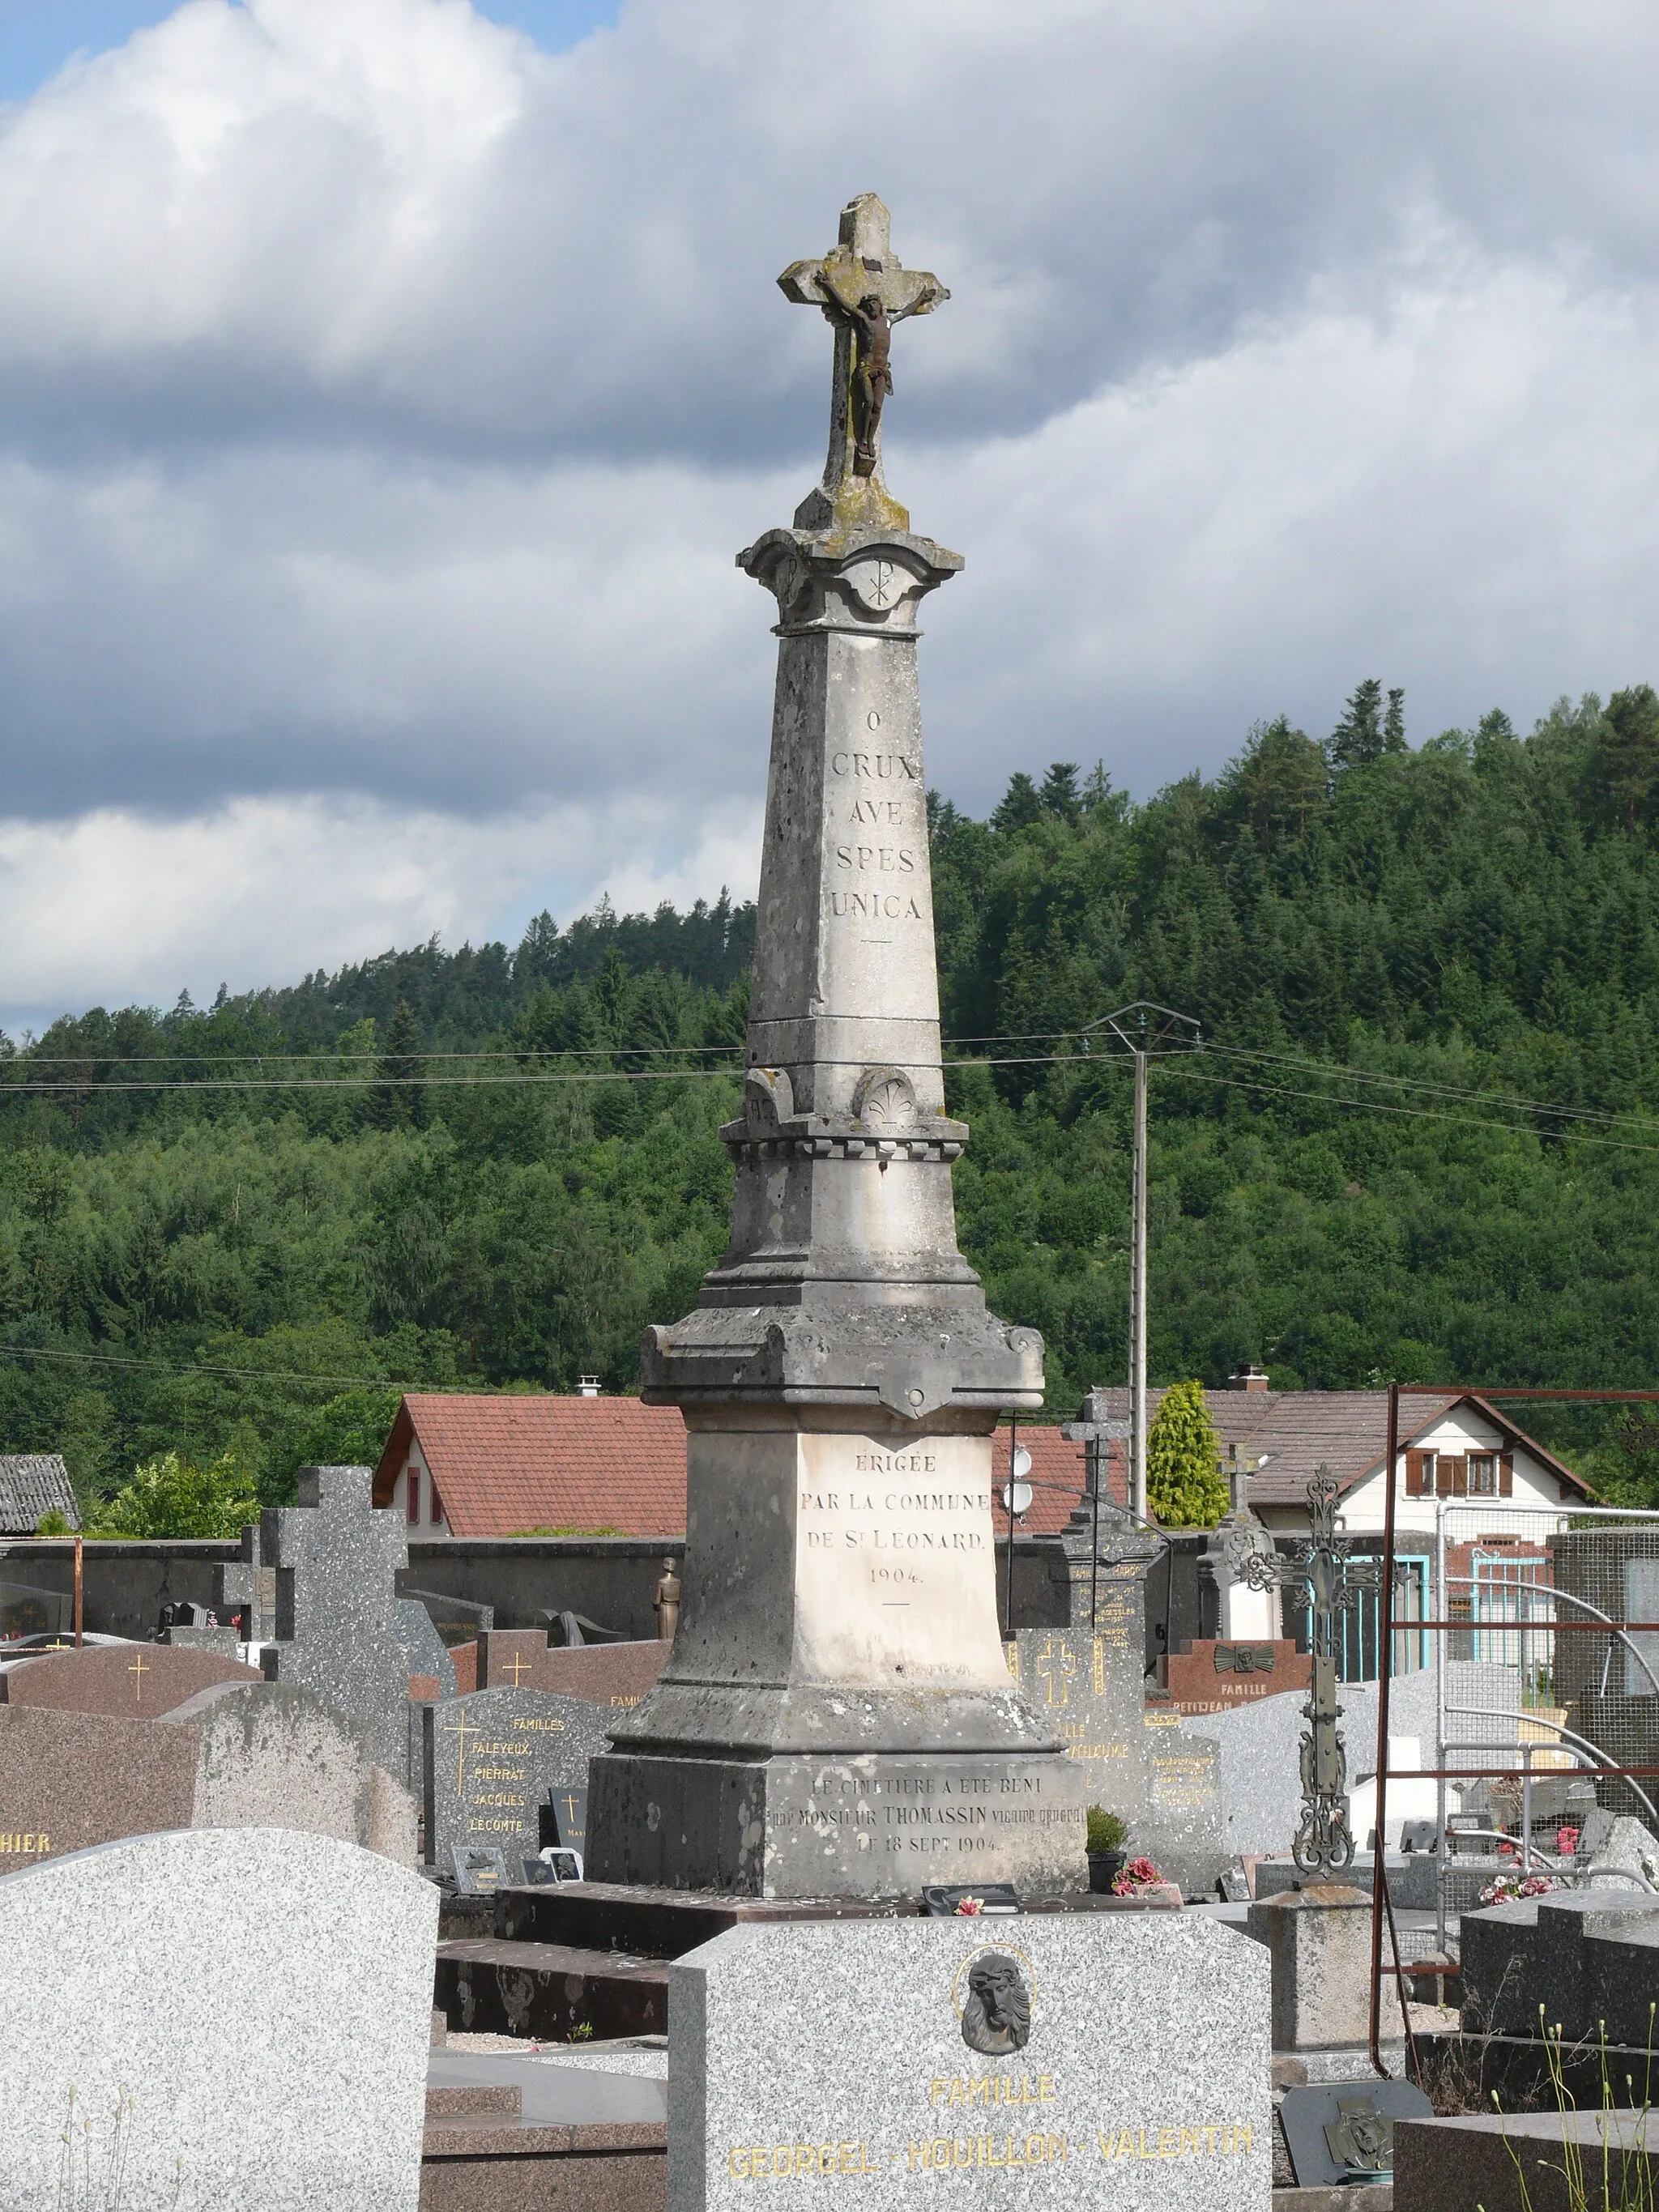 Photo showing: Saint-Leónard (Vosges, France): central cross (cemetery cross) on the cemetery, according to the inscription erected in 1904 by the commune Saint-Léonard.